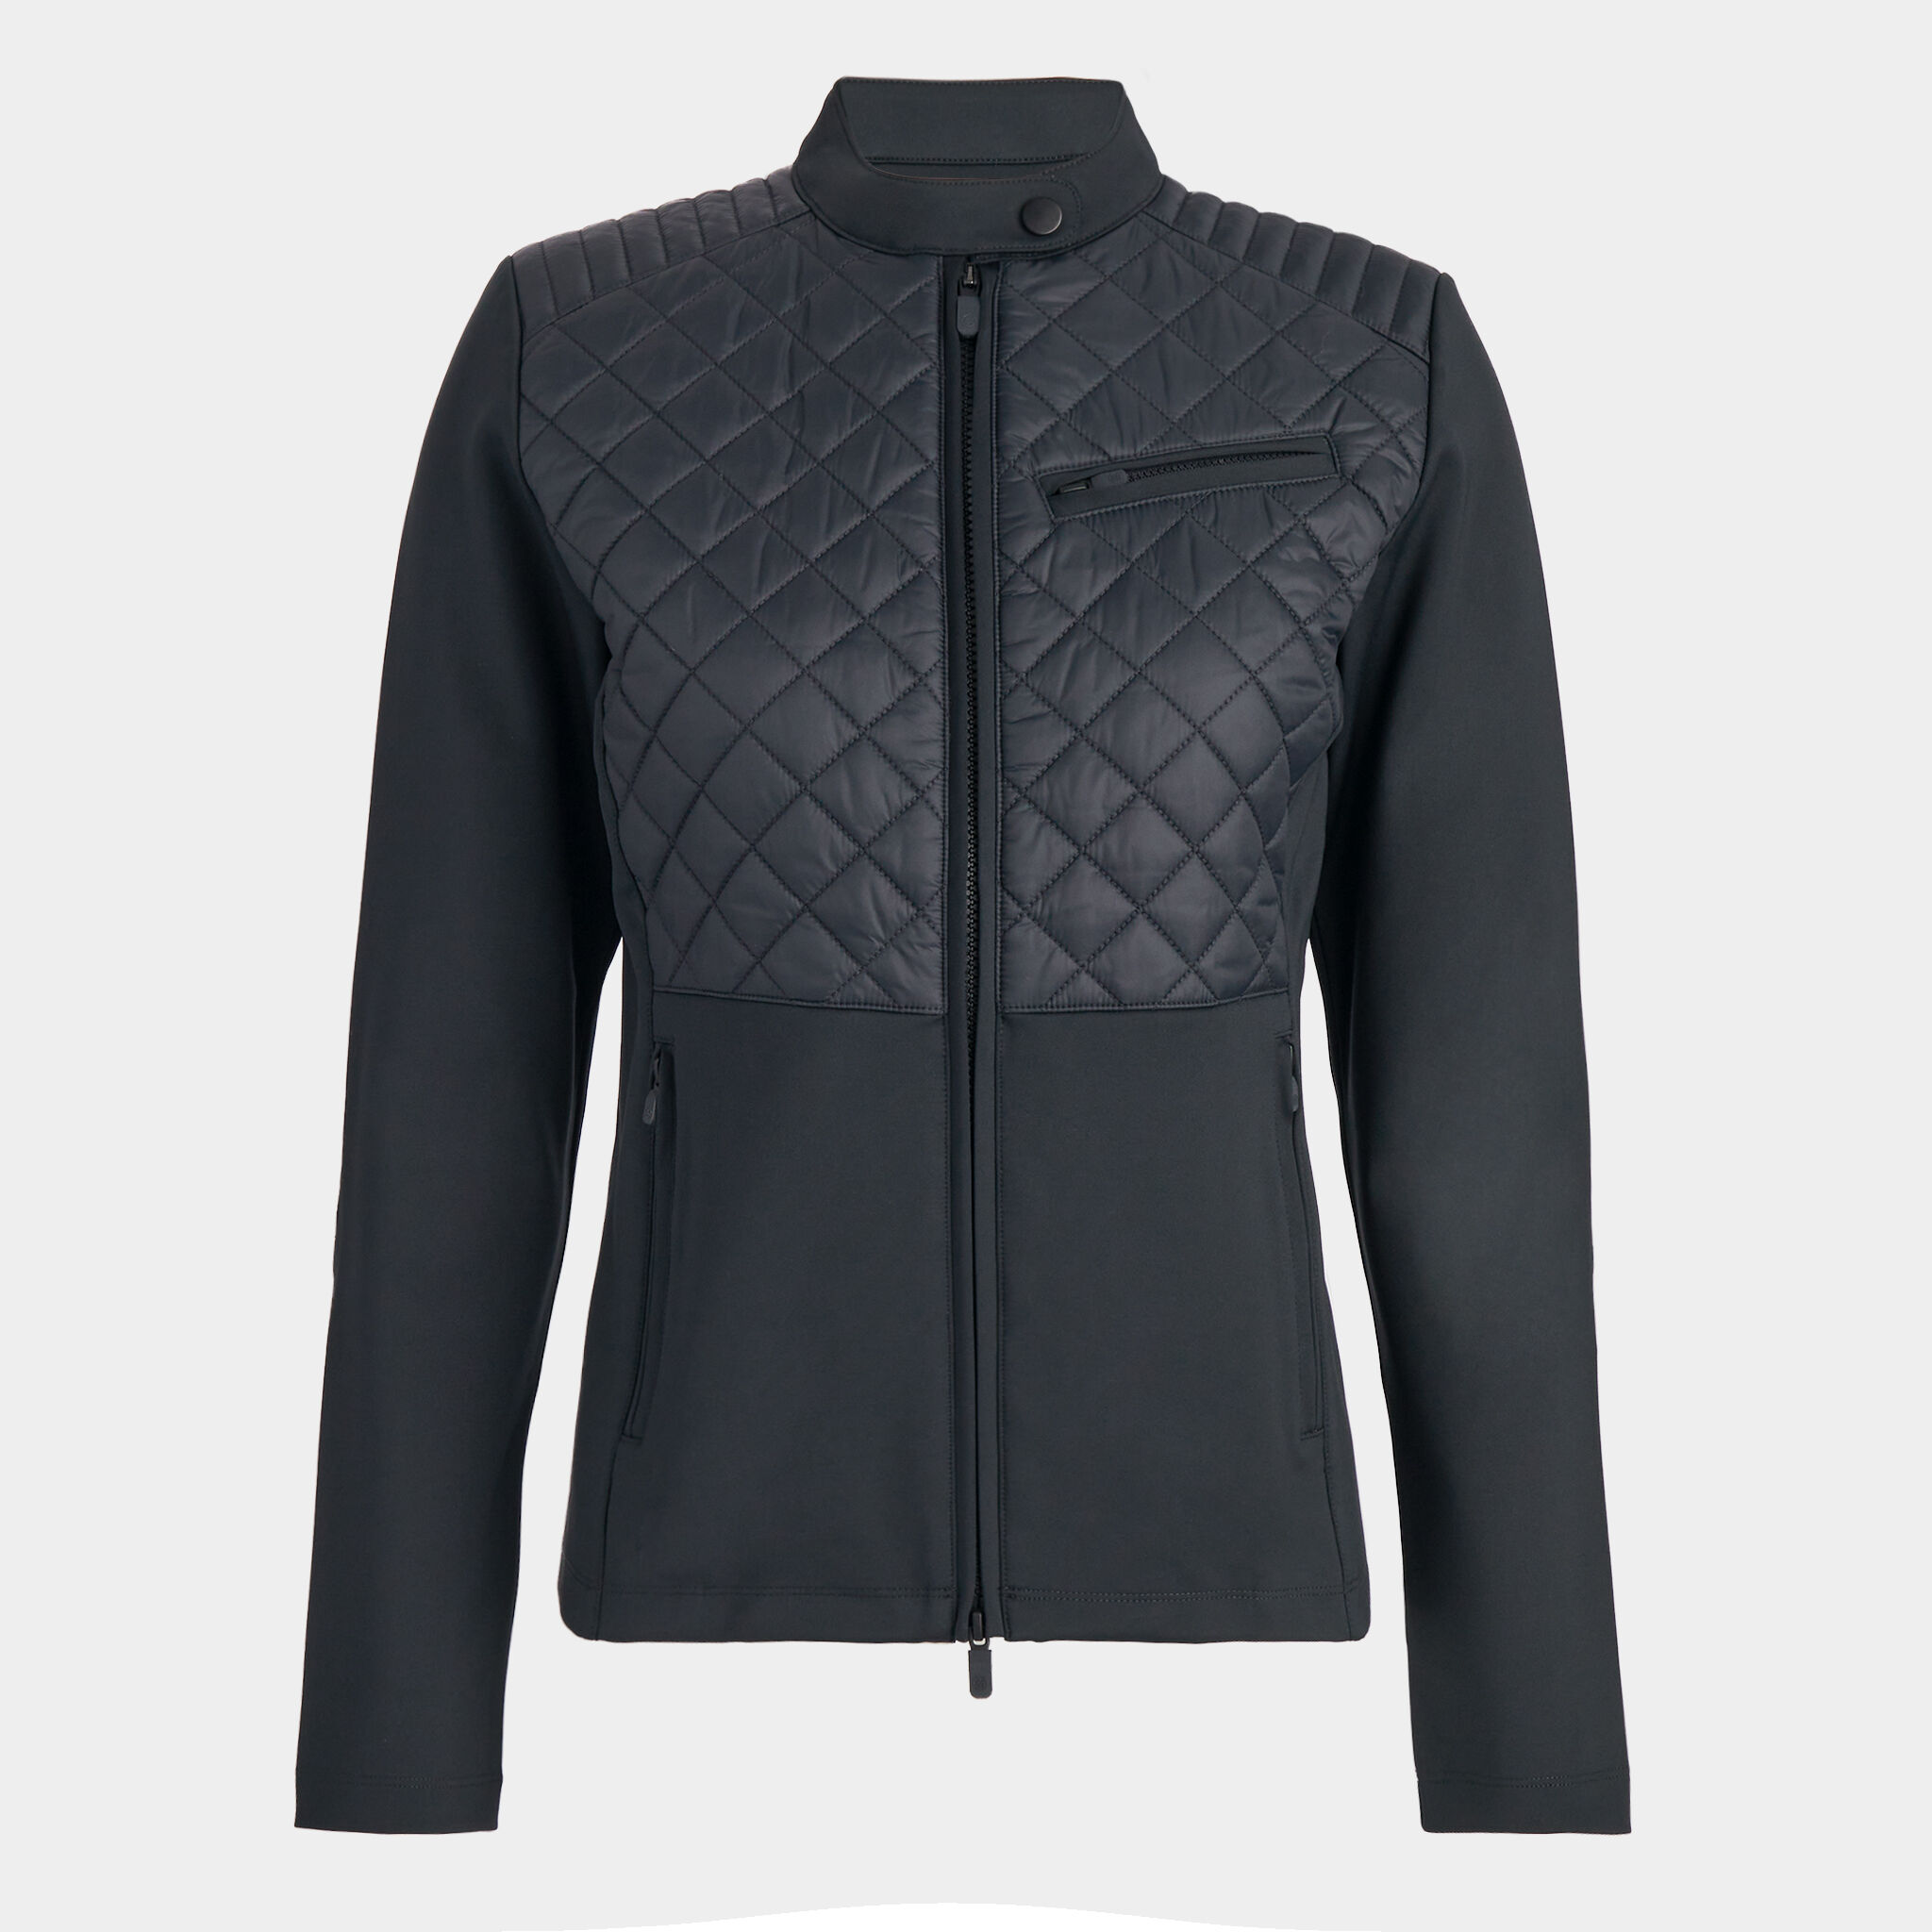 Women's Outerwear & Layers – G/FORE